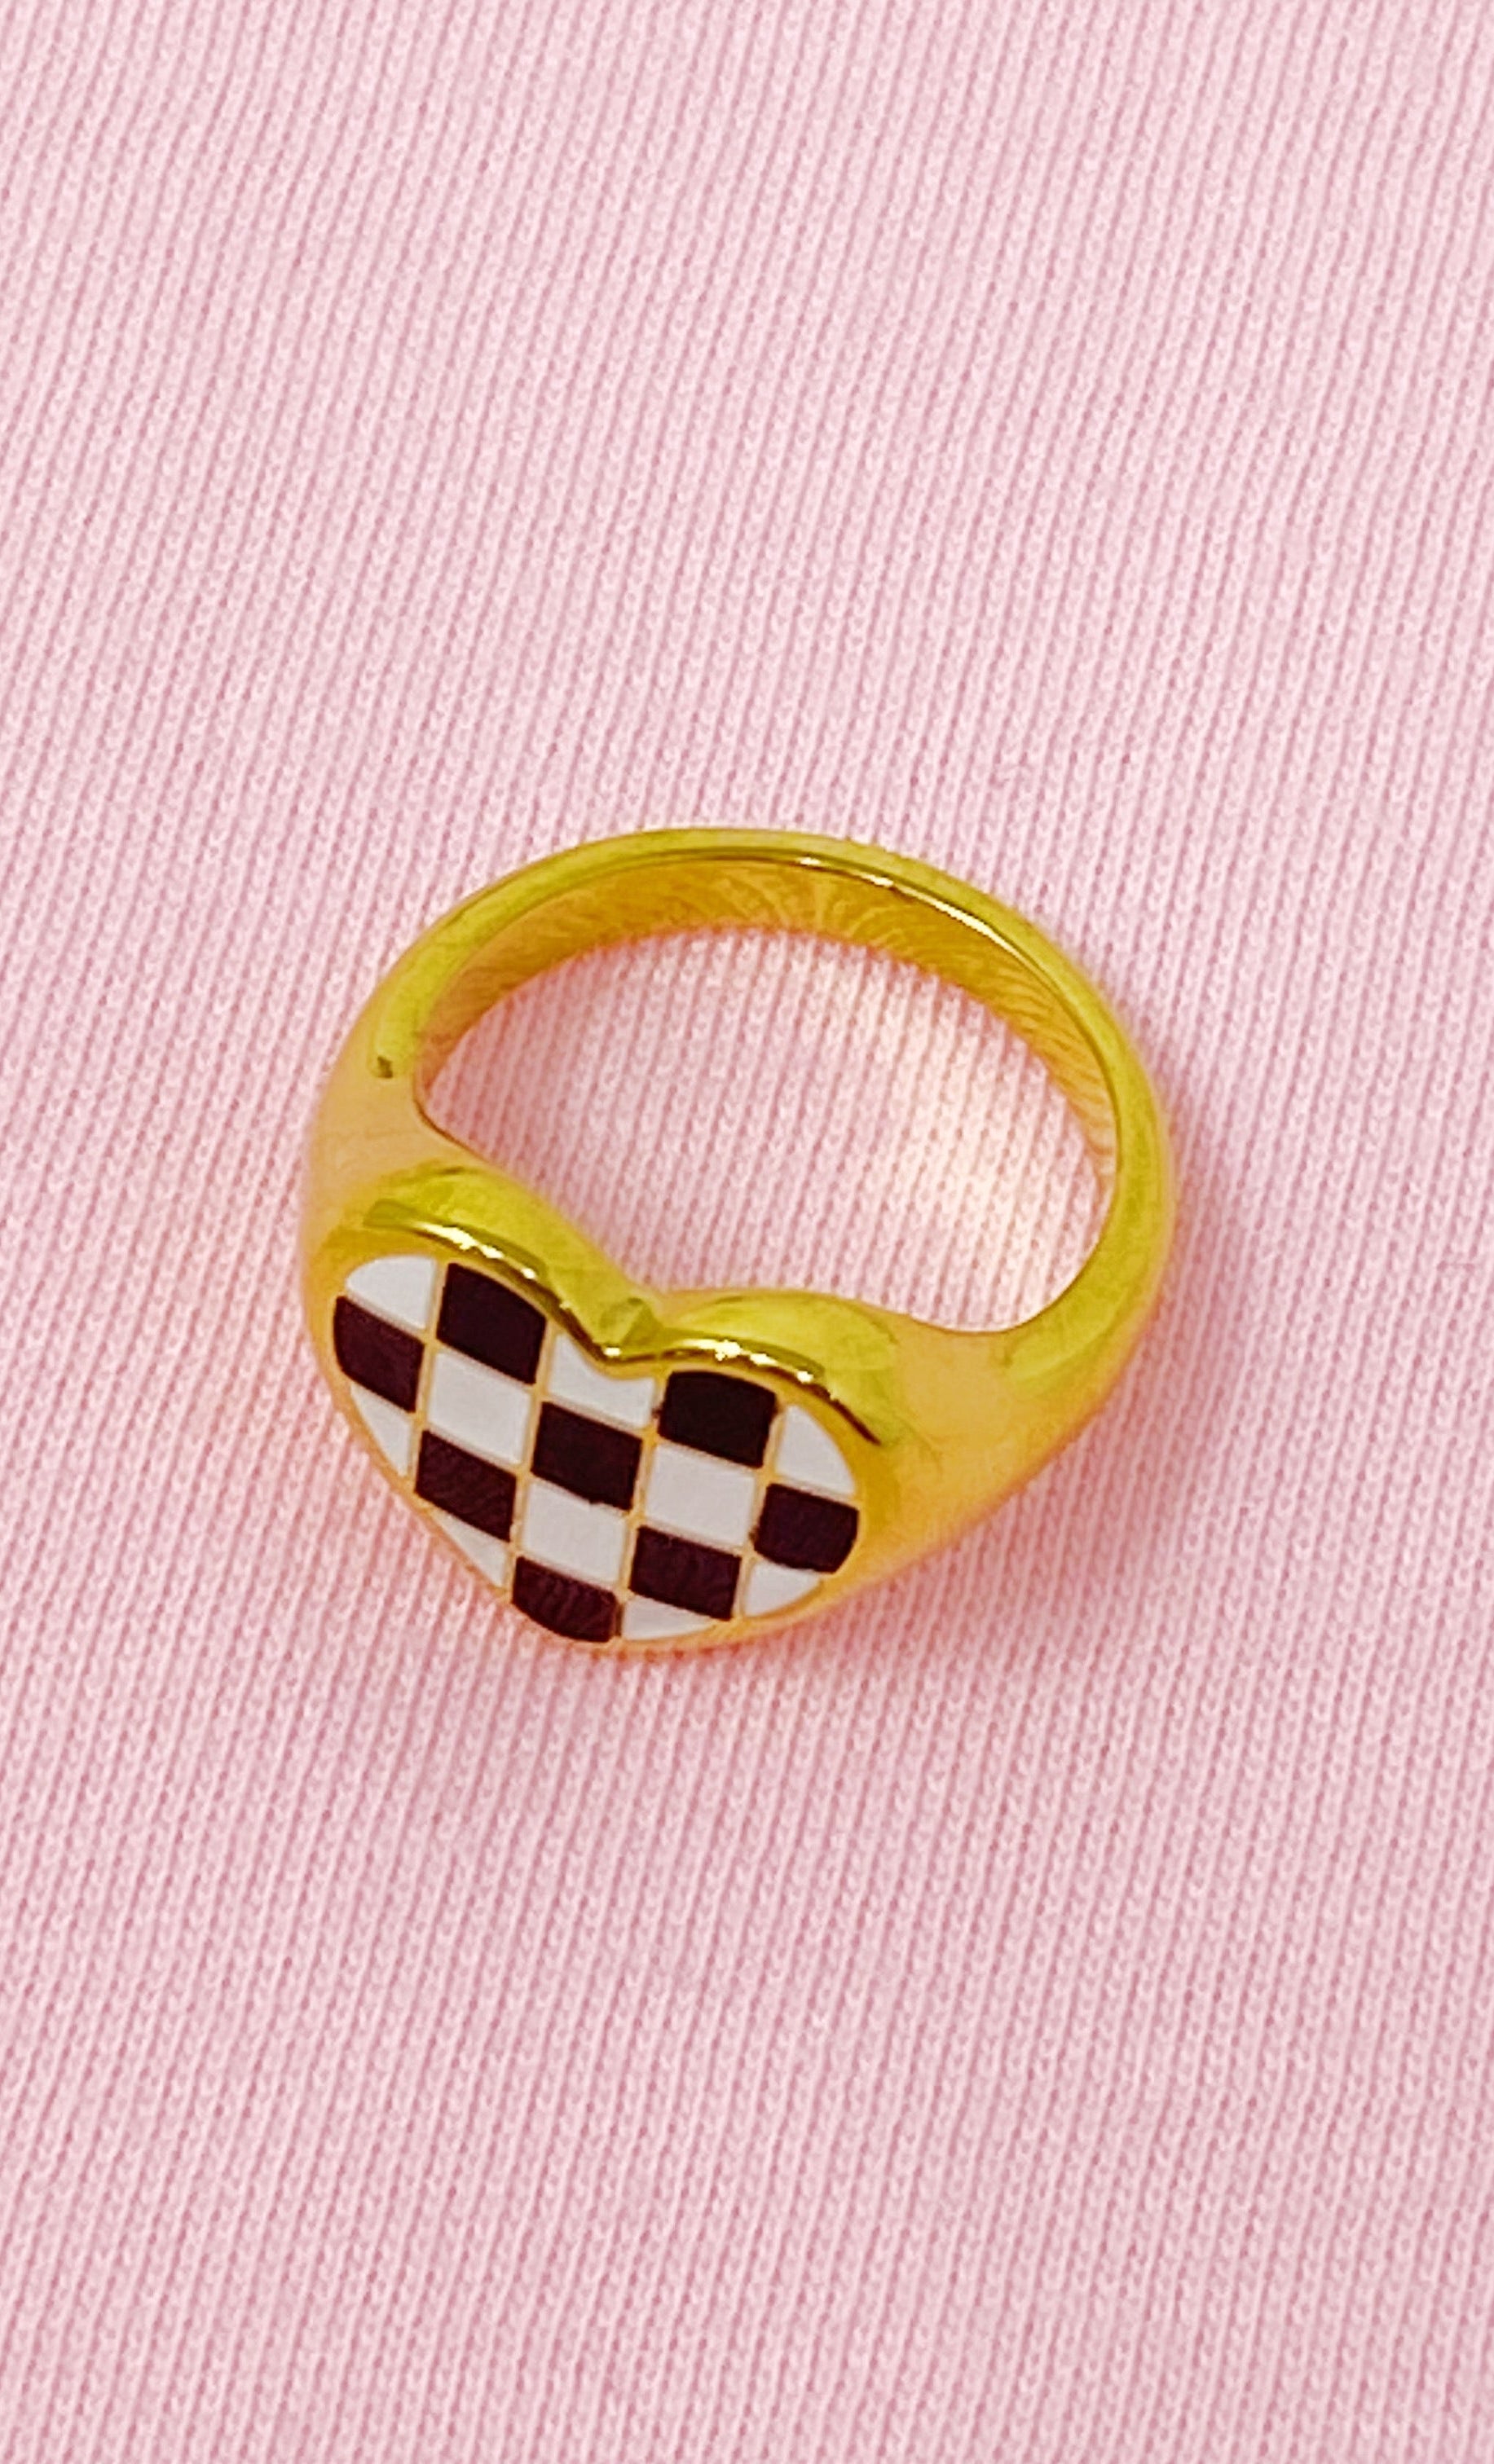 Checkered Heart Signet Ring Ellisonyoung.com